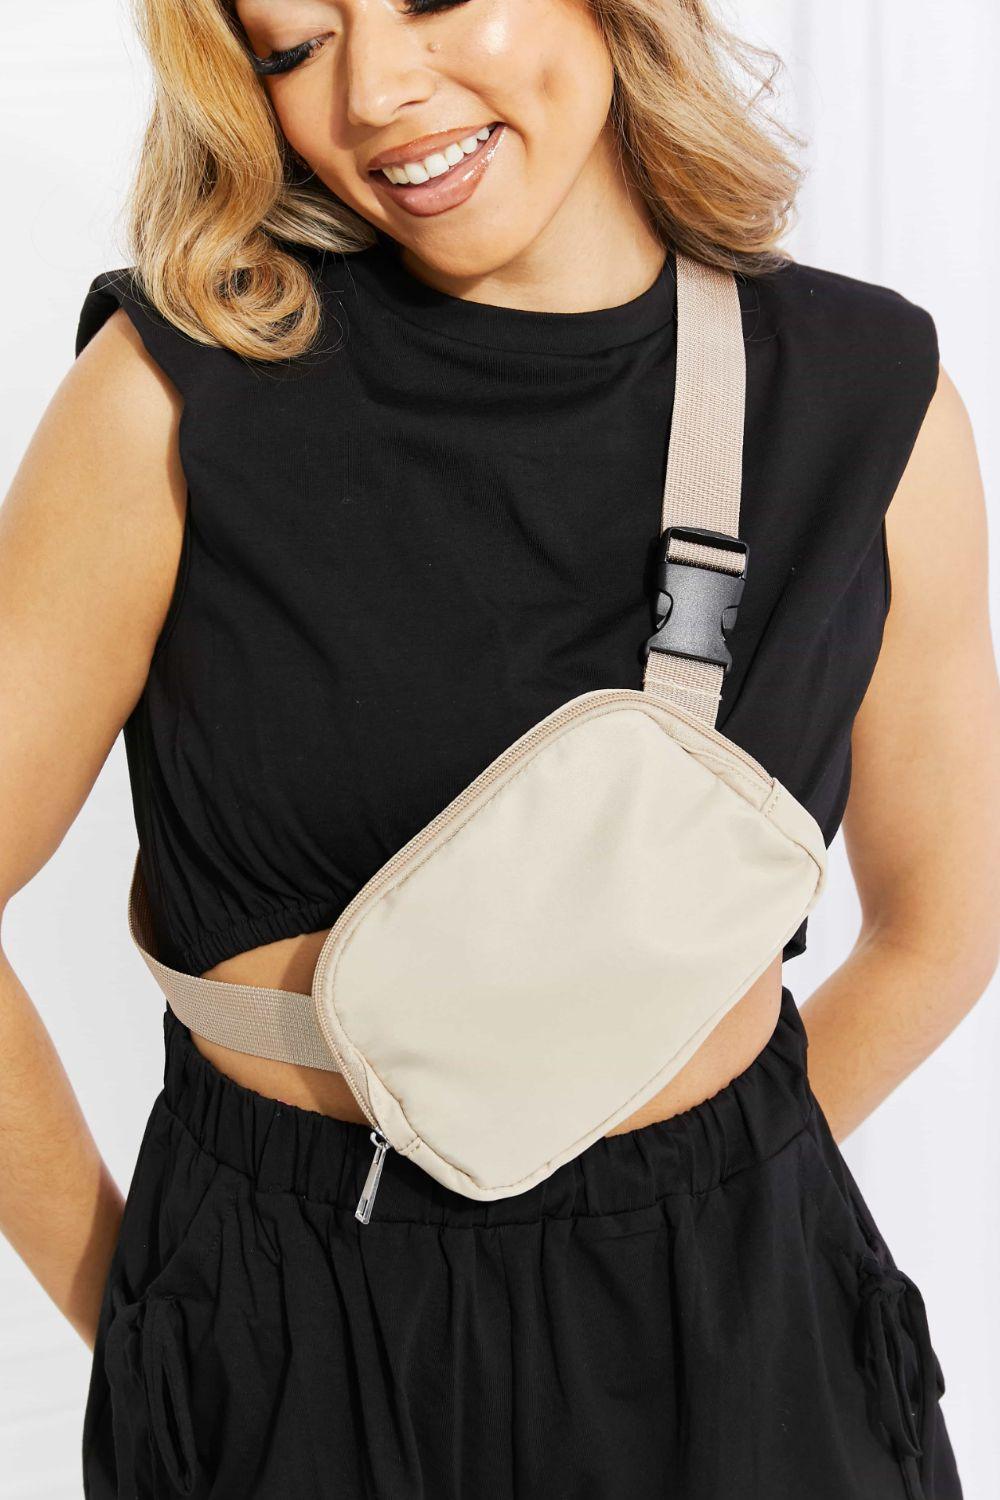 Are Necklace Bags the New Fanny Pack?